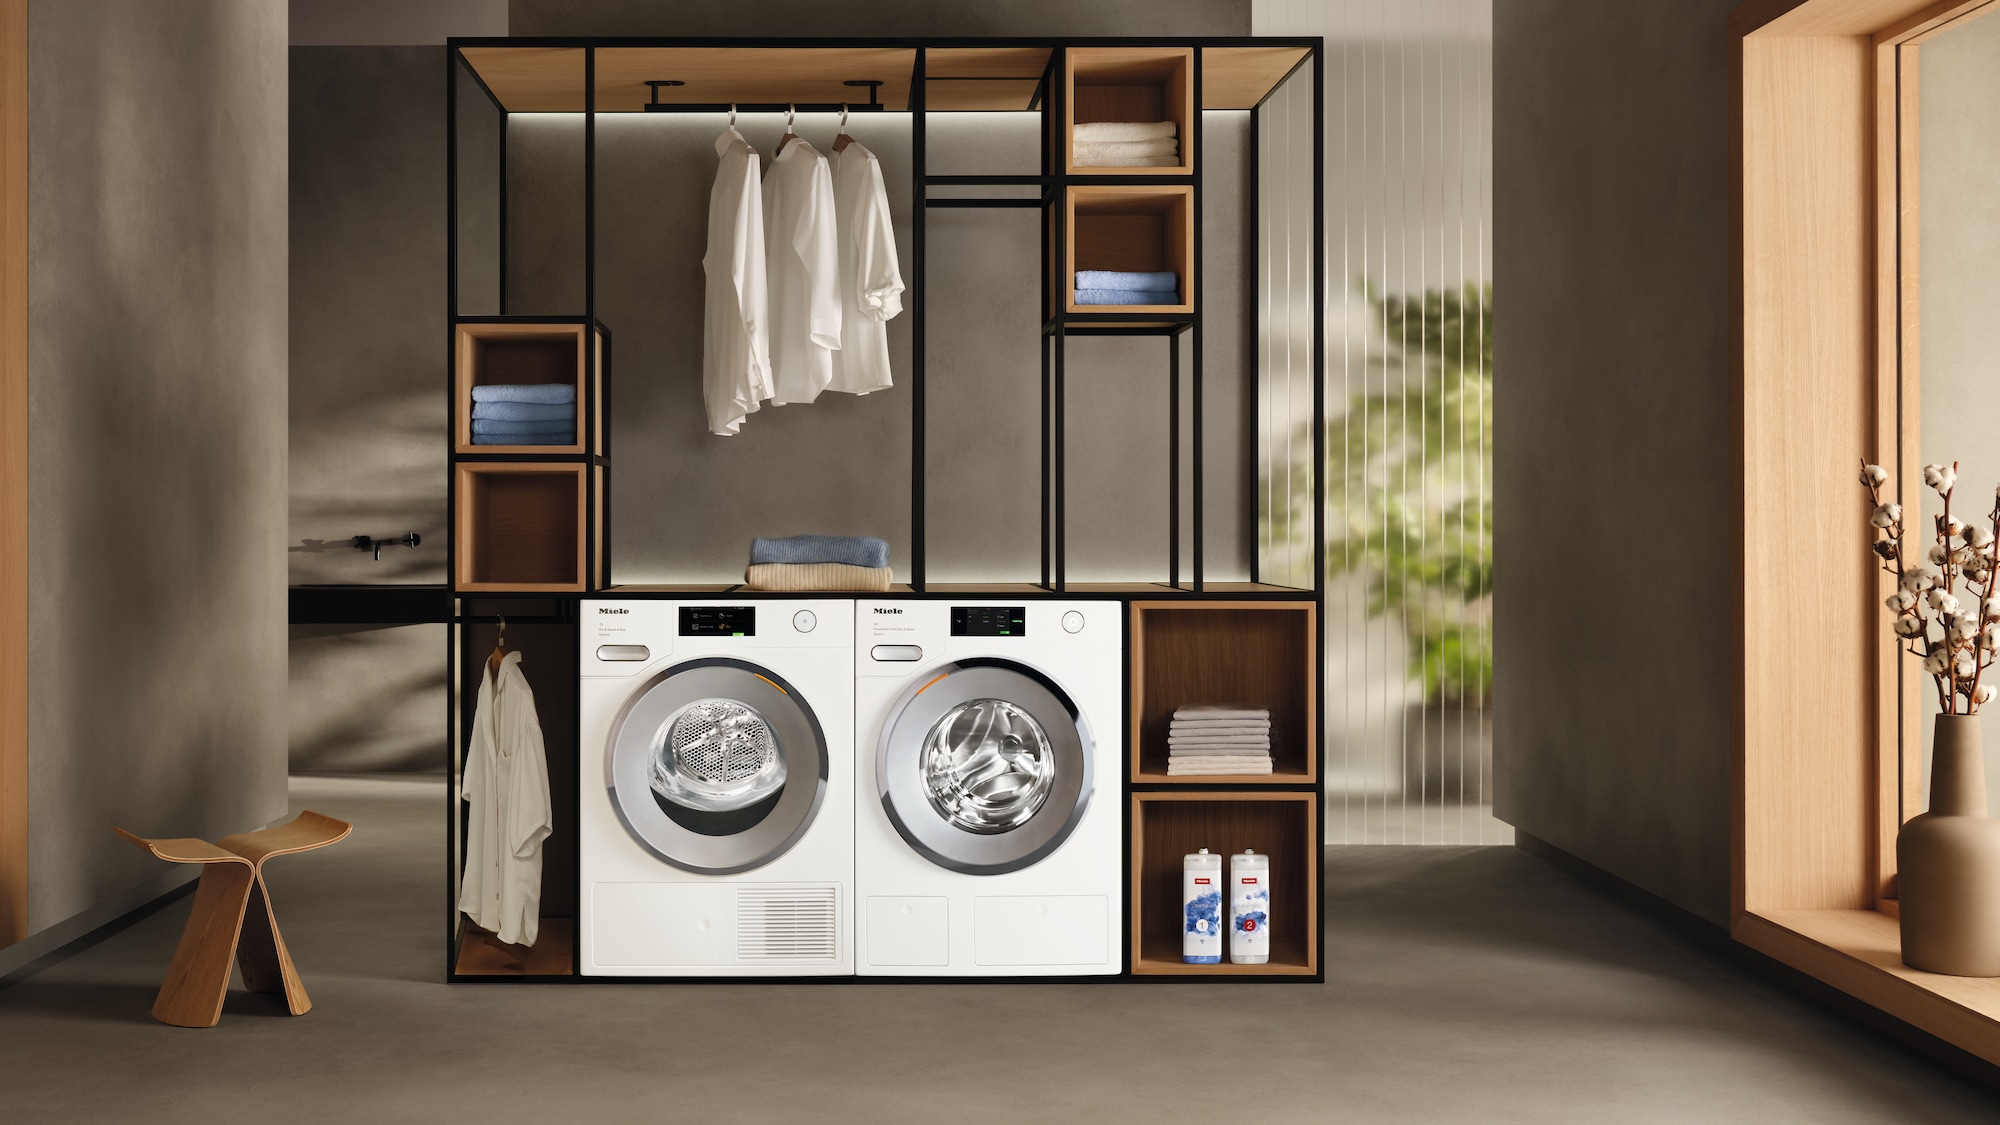 High Quality Washers and Dryers